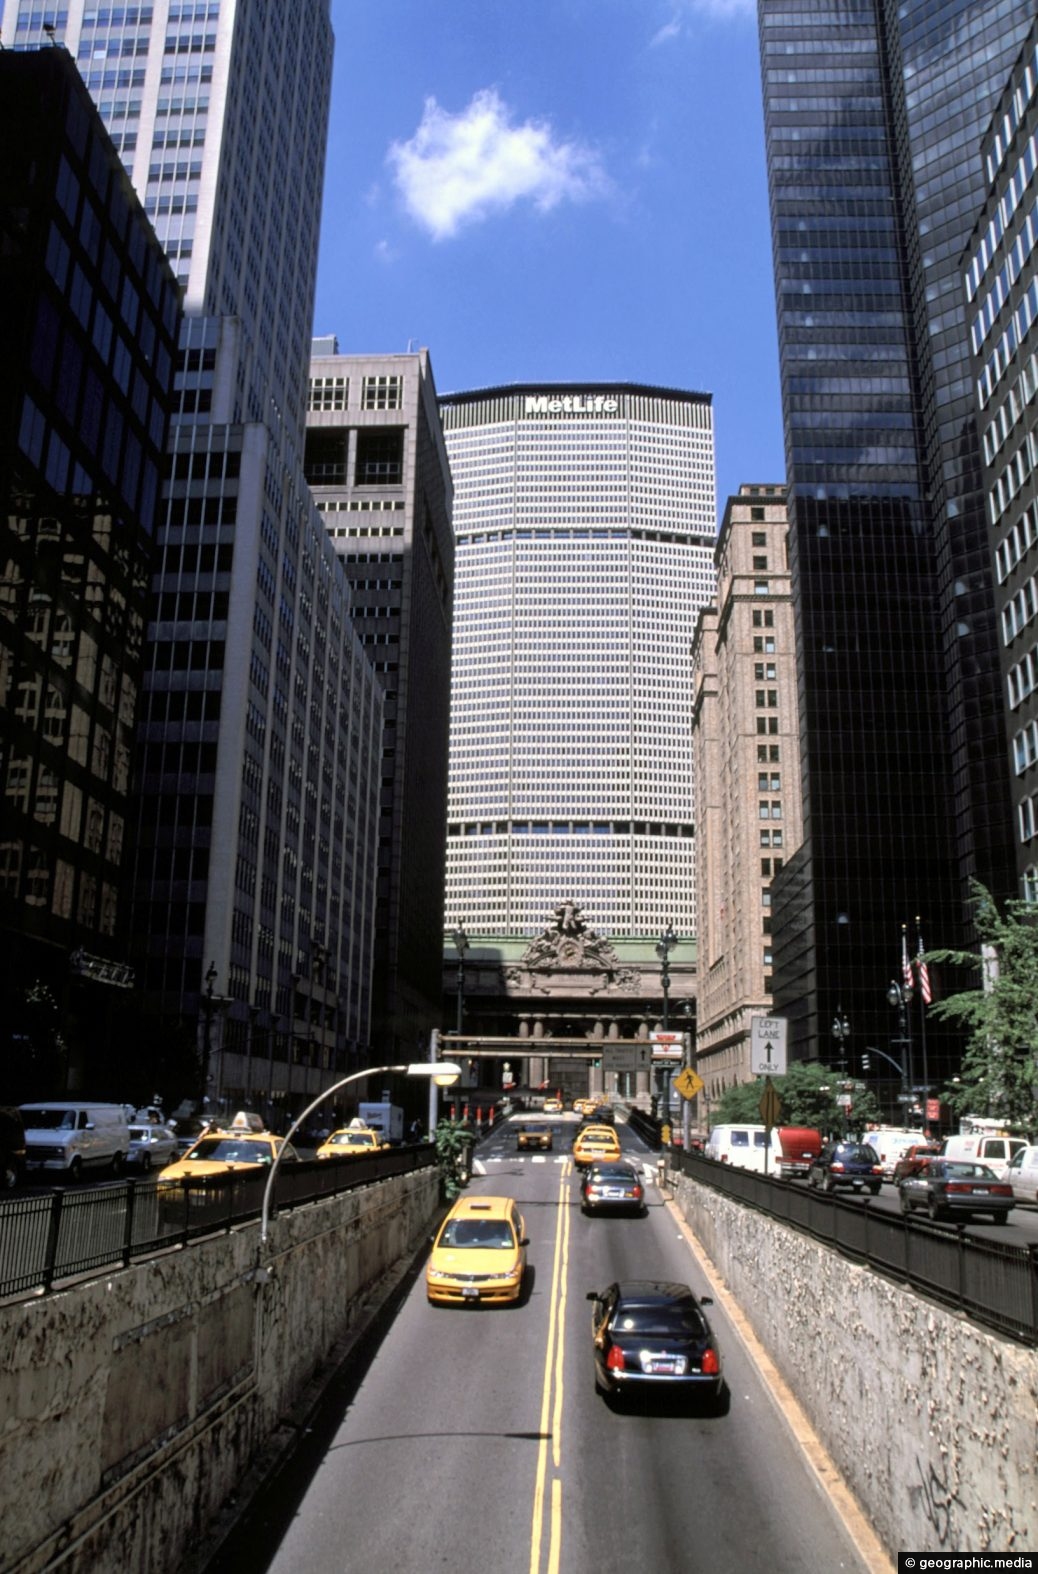 View of Wall Street in New York City